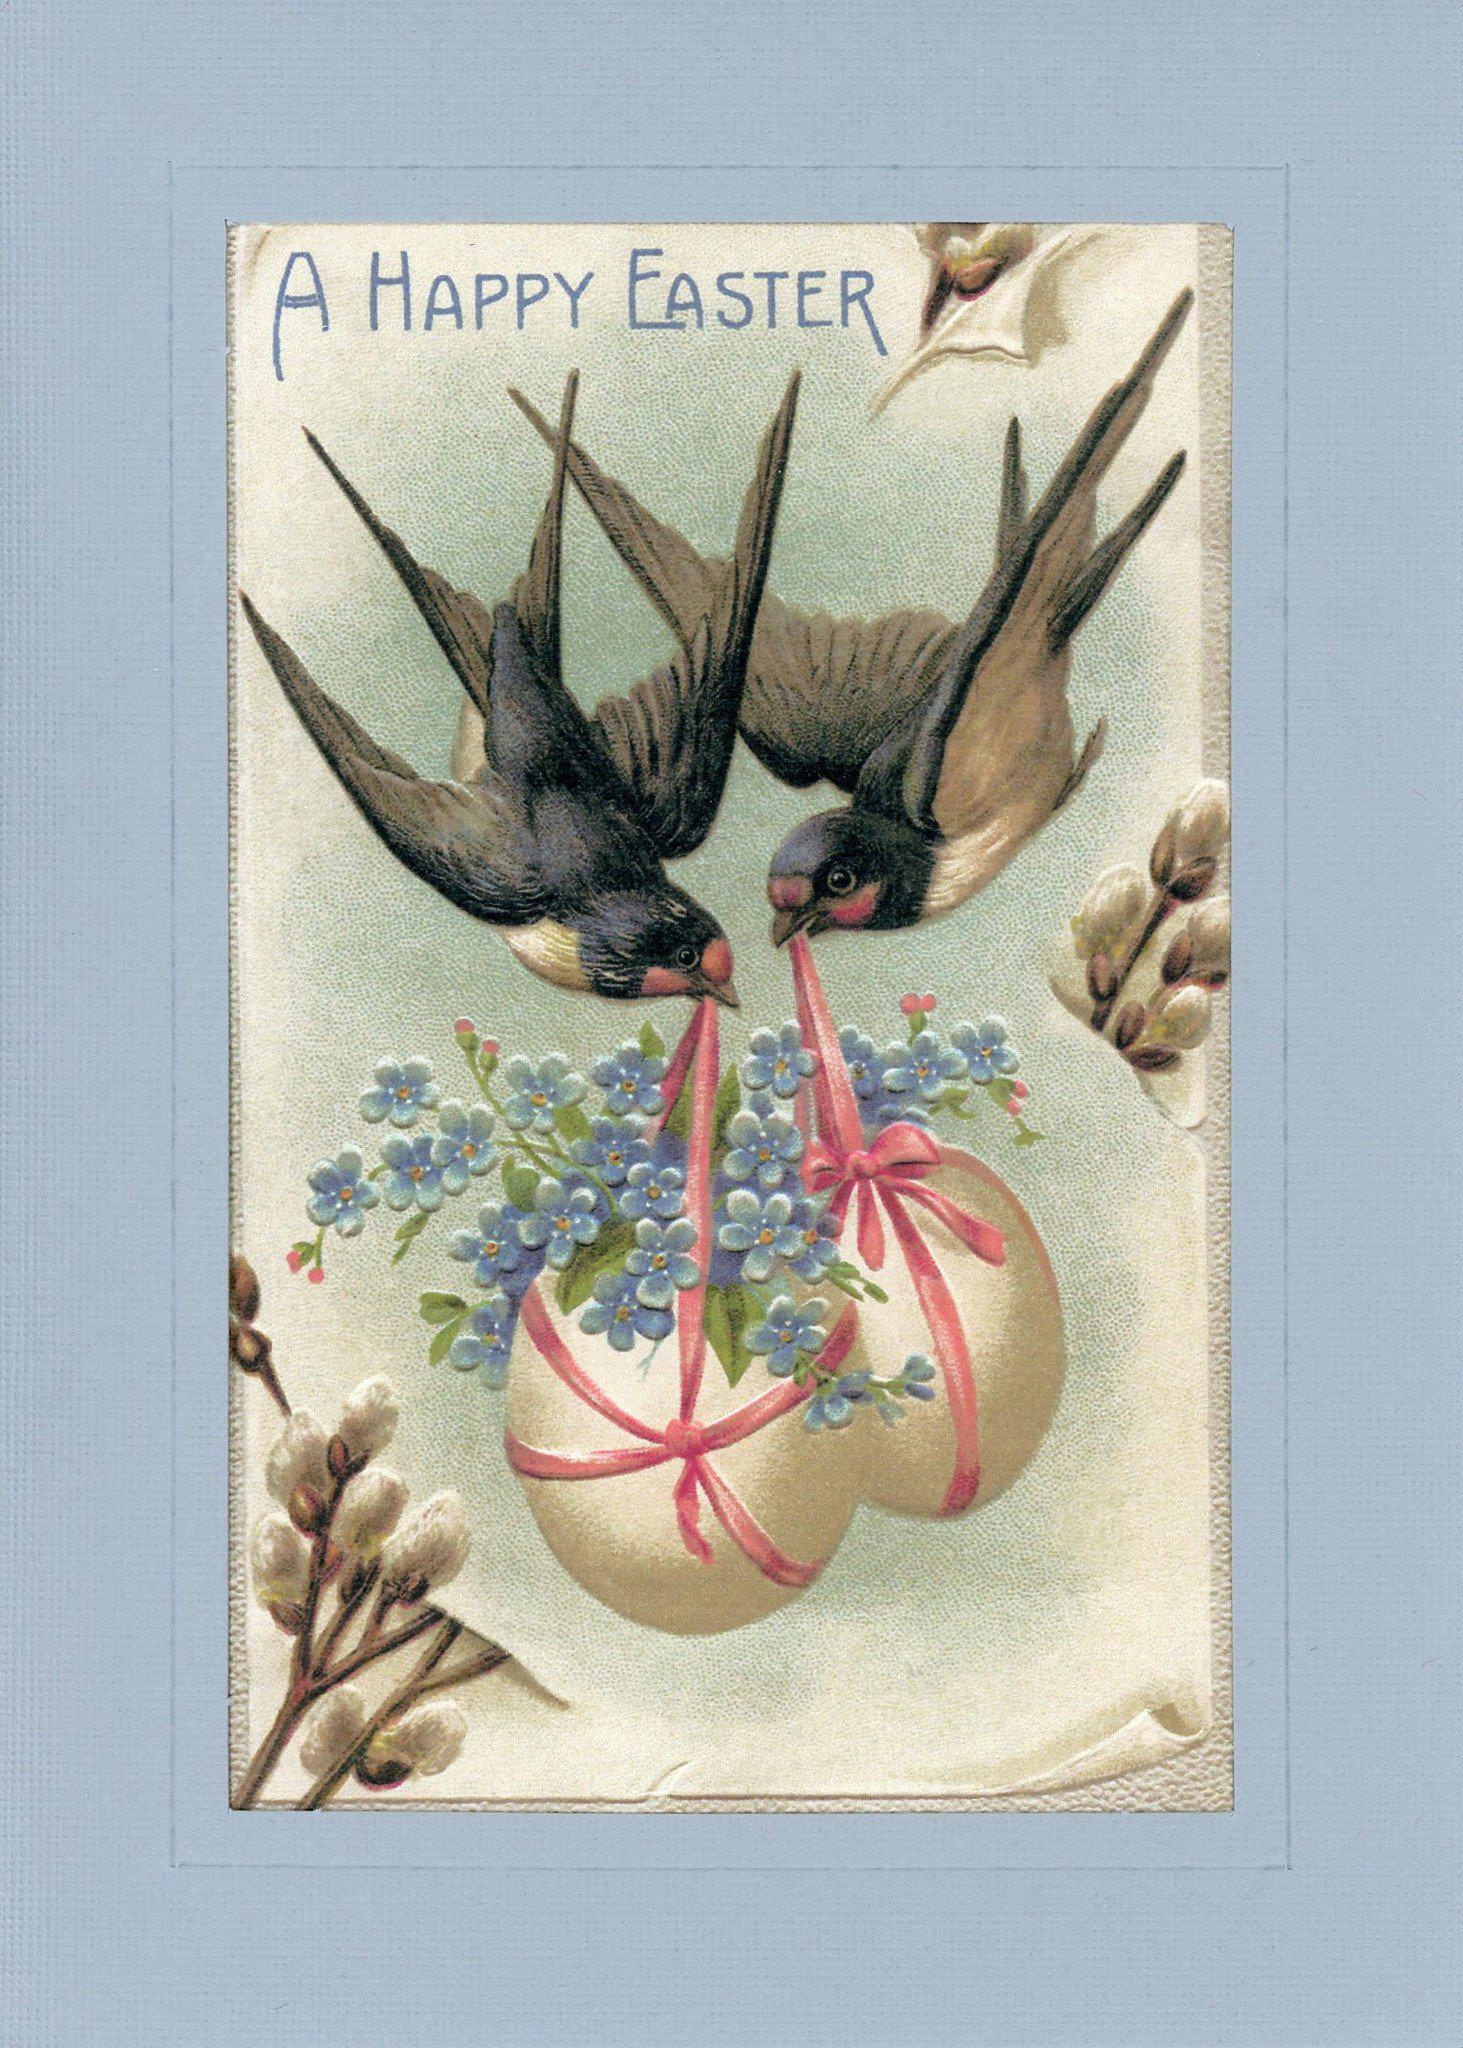 happy easter cards